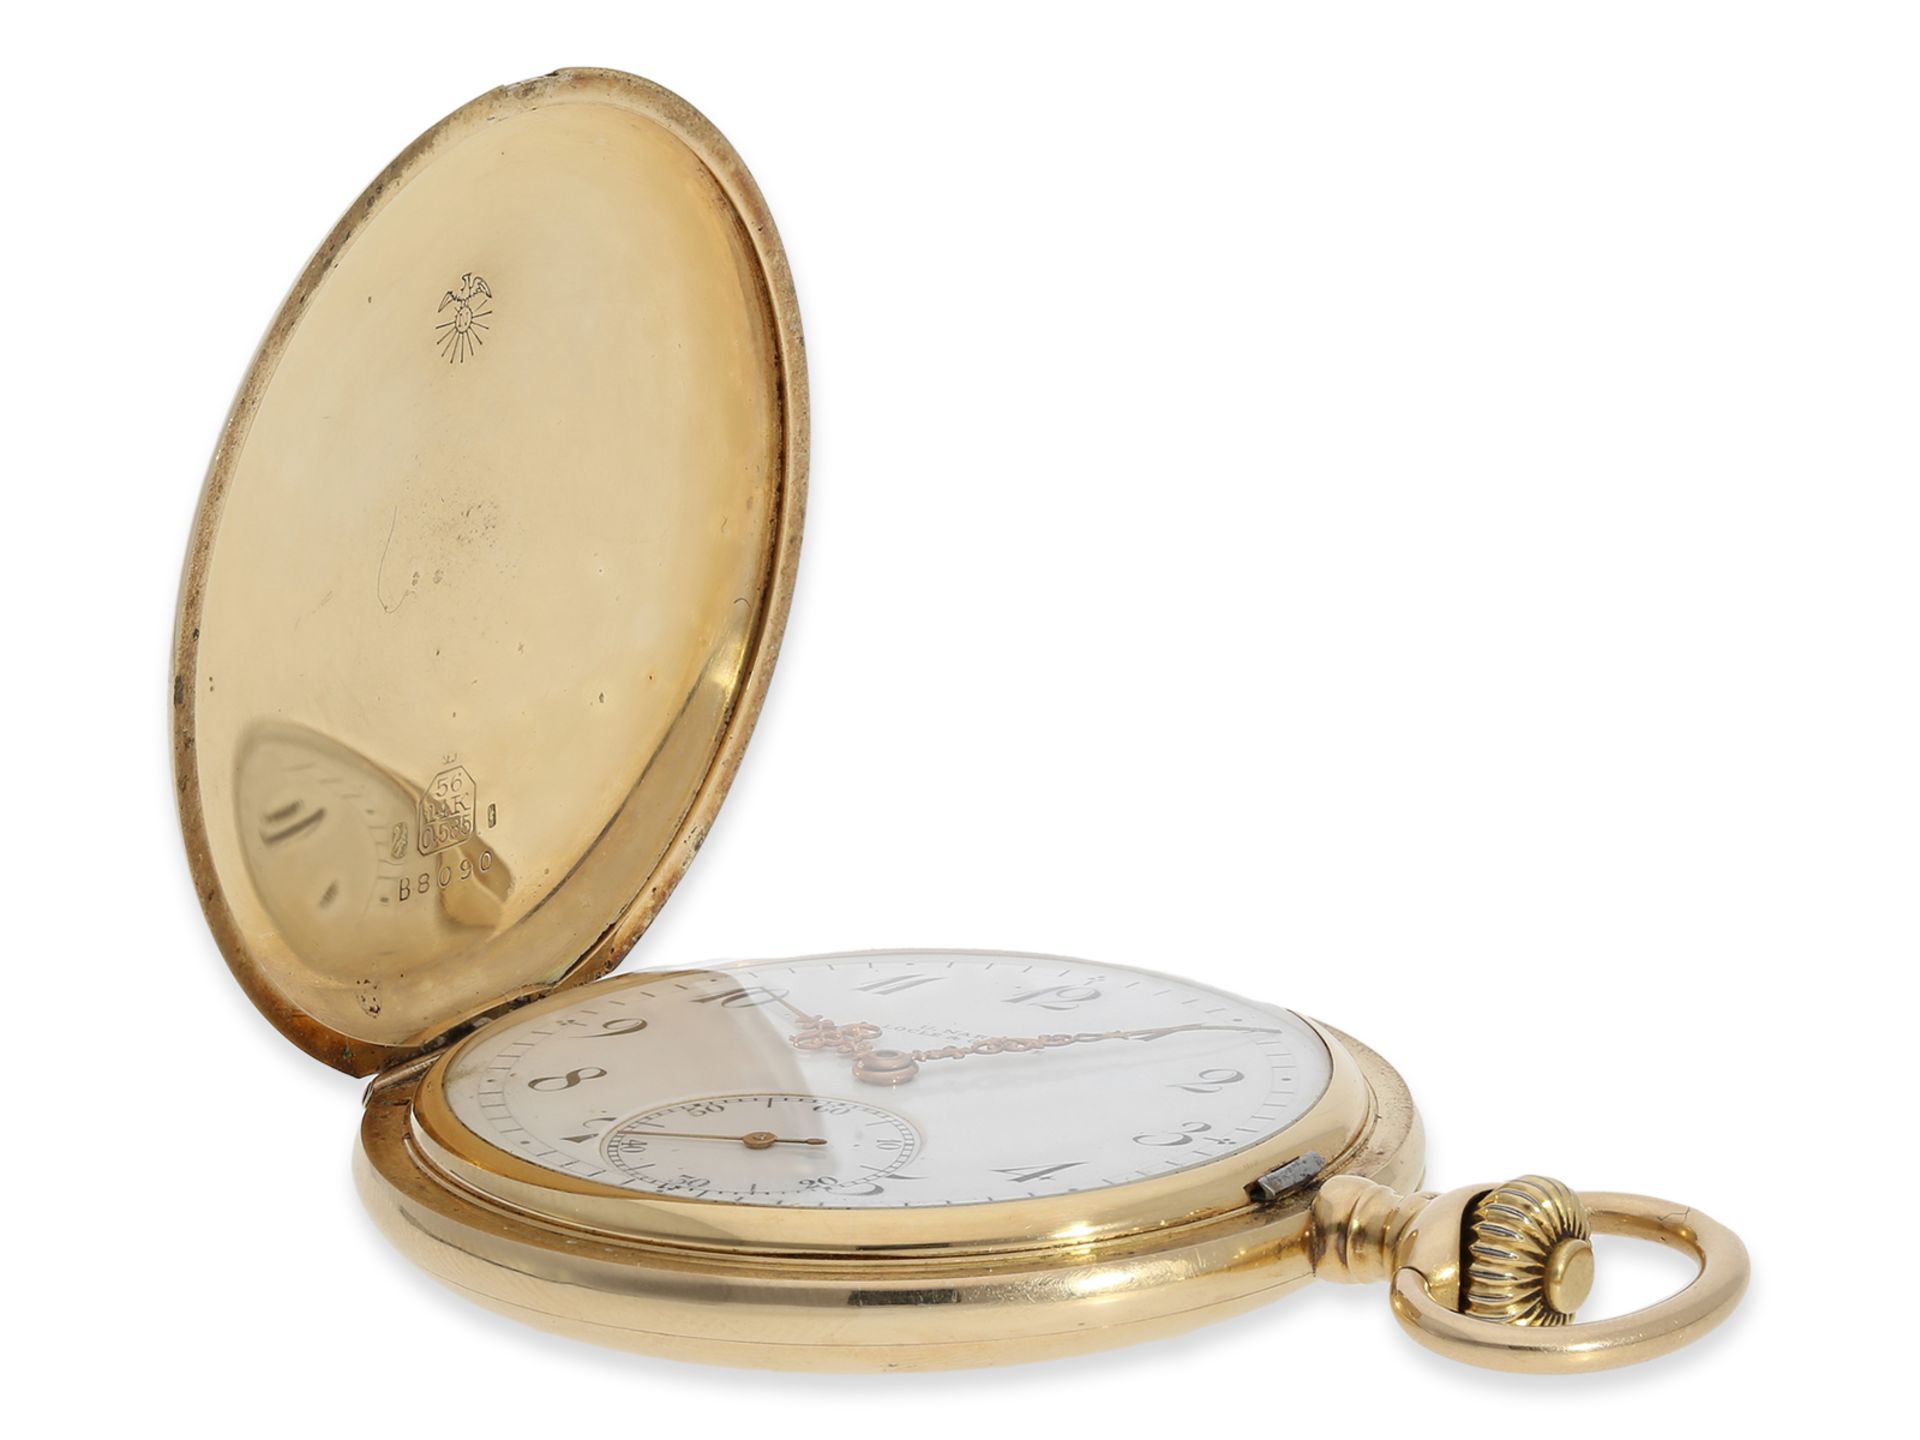 Pocket Watch: very fine precision pocket watch by Ulysse Nardin with original papers from 1913 - Image 5 of 8